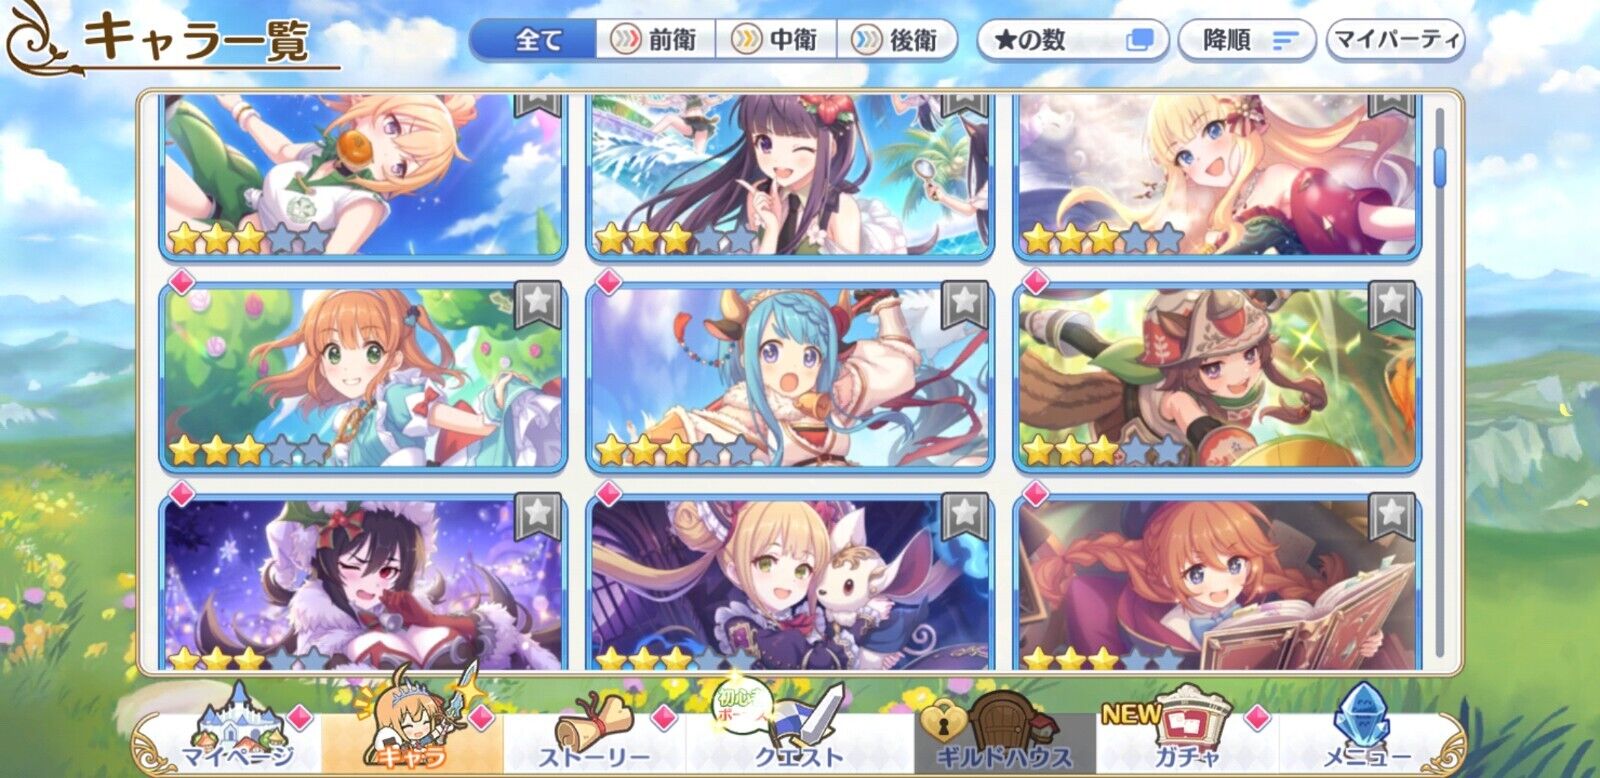 [JP][INSTANT] Priconne 35x3* +200k Jewels 6x3* tickets Starter Account Princess Connect Re:Dive-Mobile Games Starter